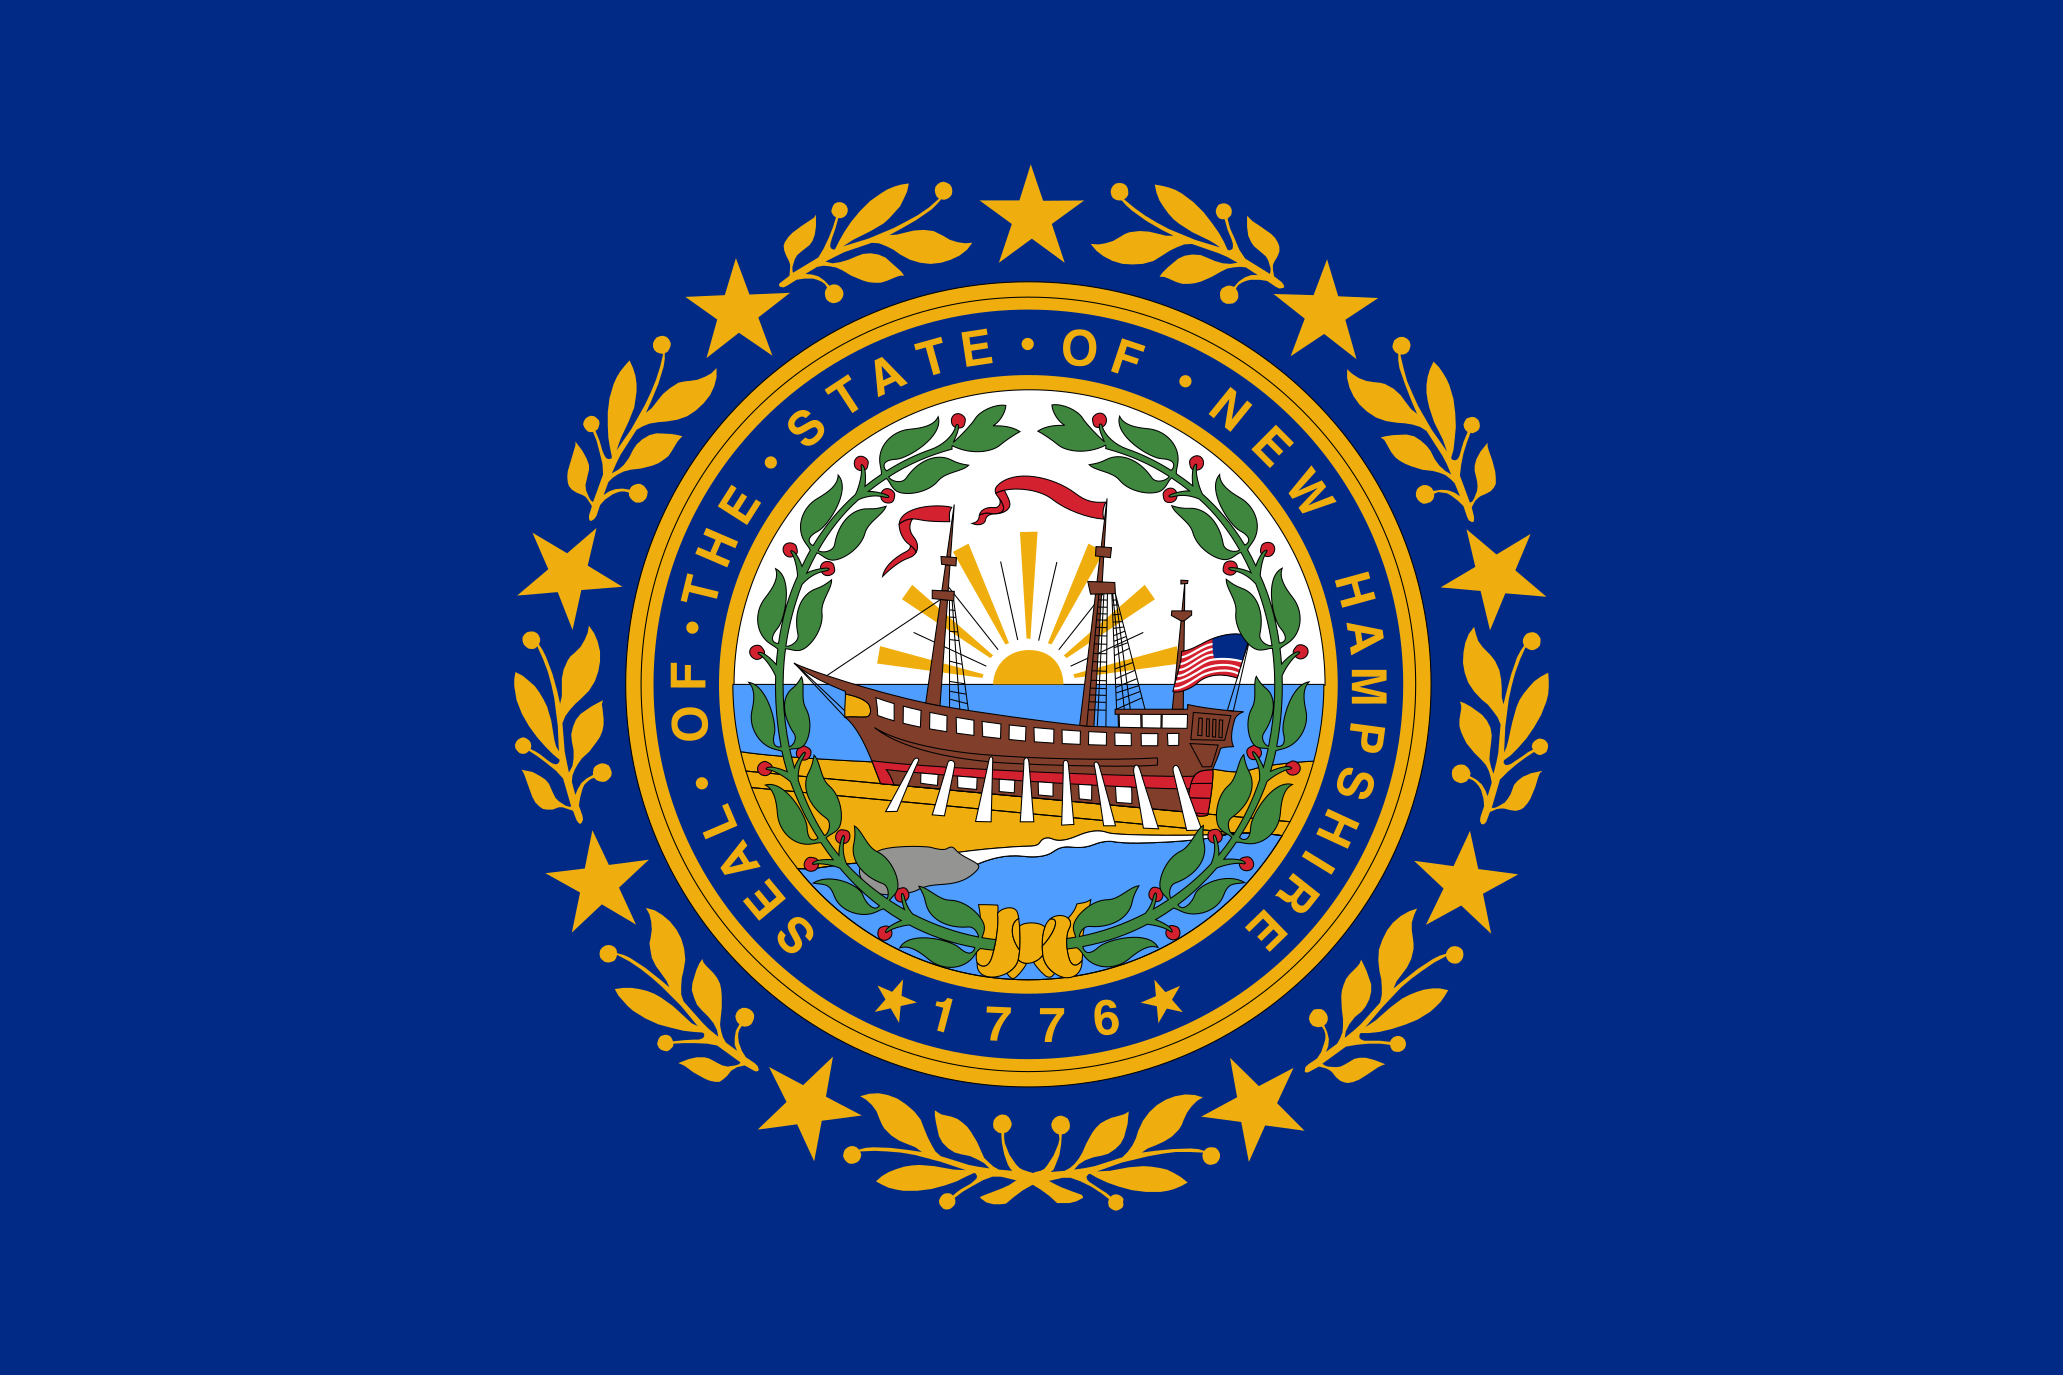 Free New Hampshire Flag Images: AI, EPS, GIF, JPG, PDF, PNG, SVG and more!